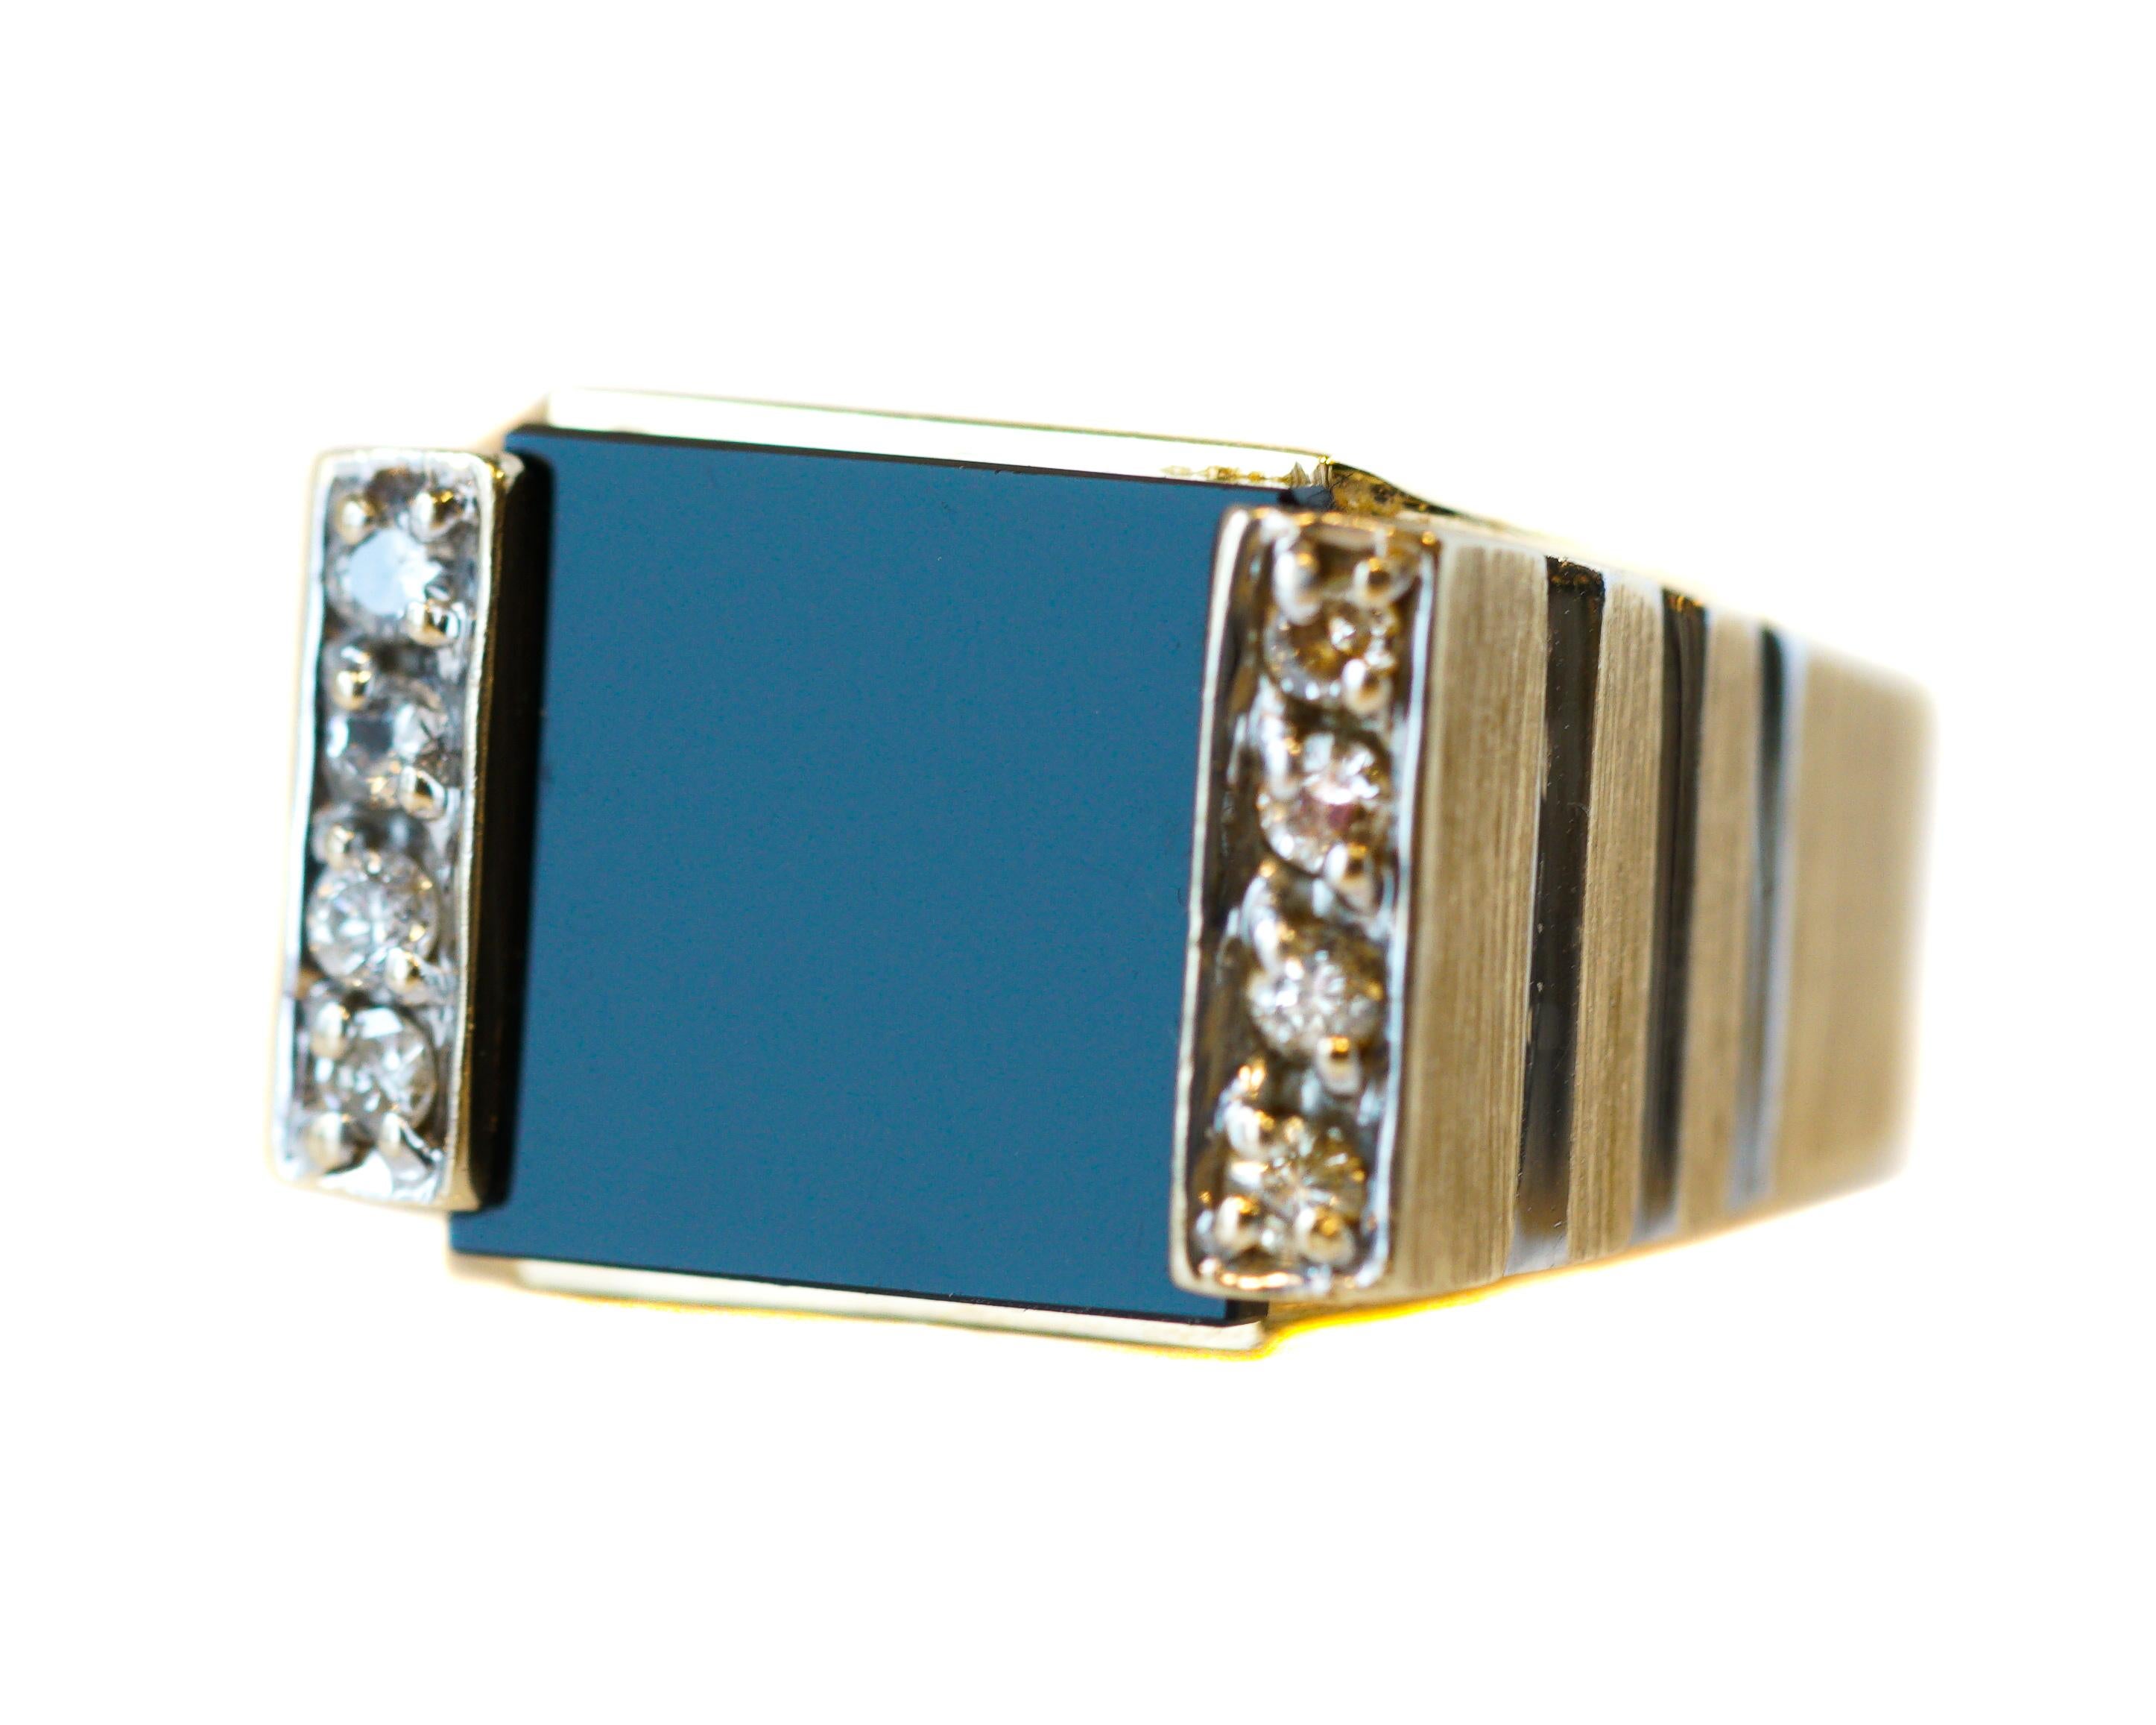 Contemporary Onyx and Diamond Two-Tone Gold Men's Ring